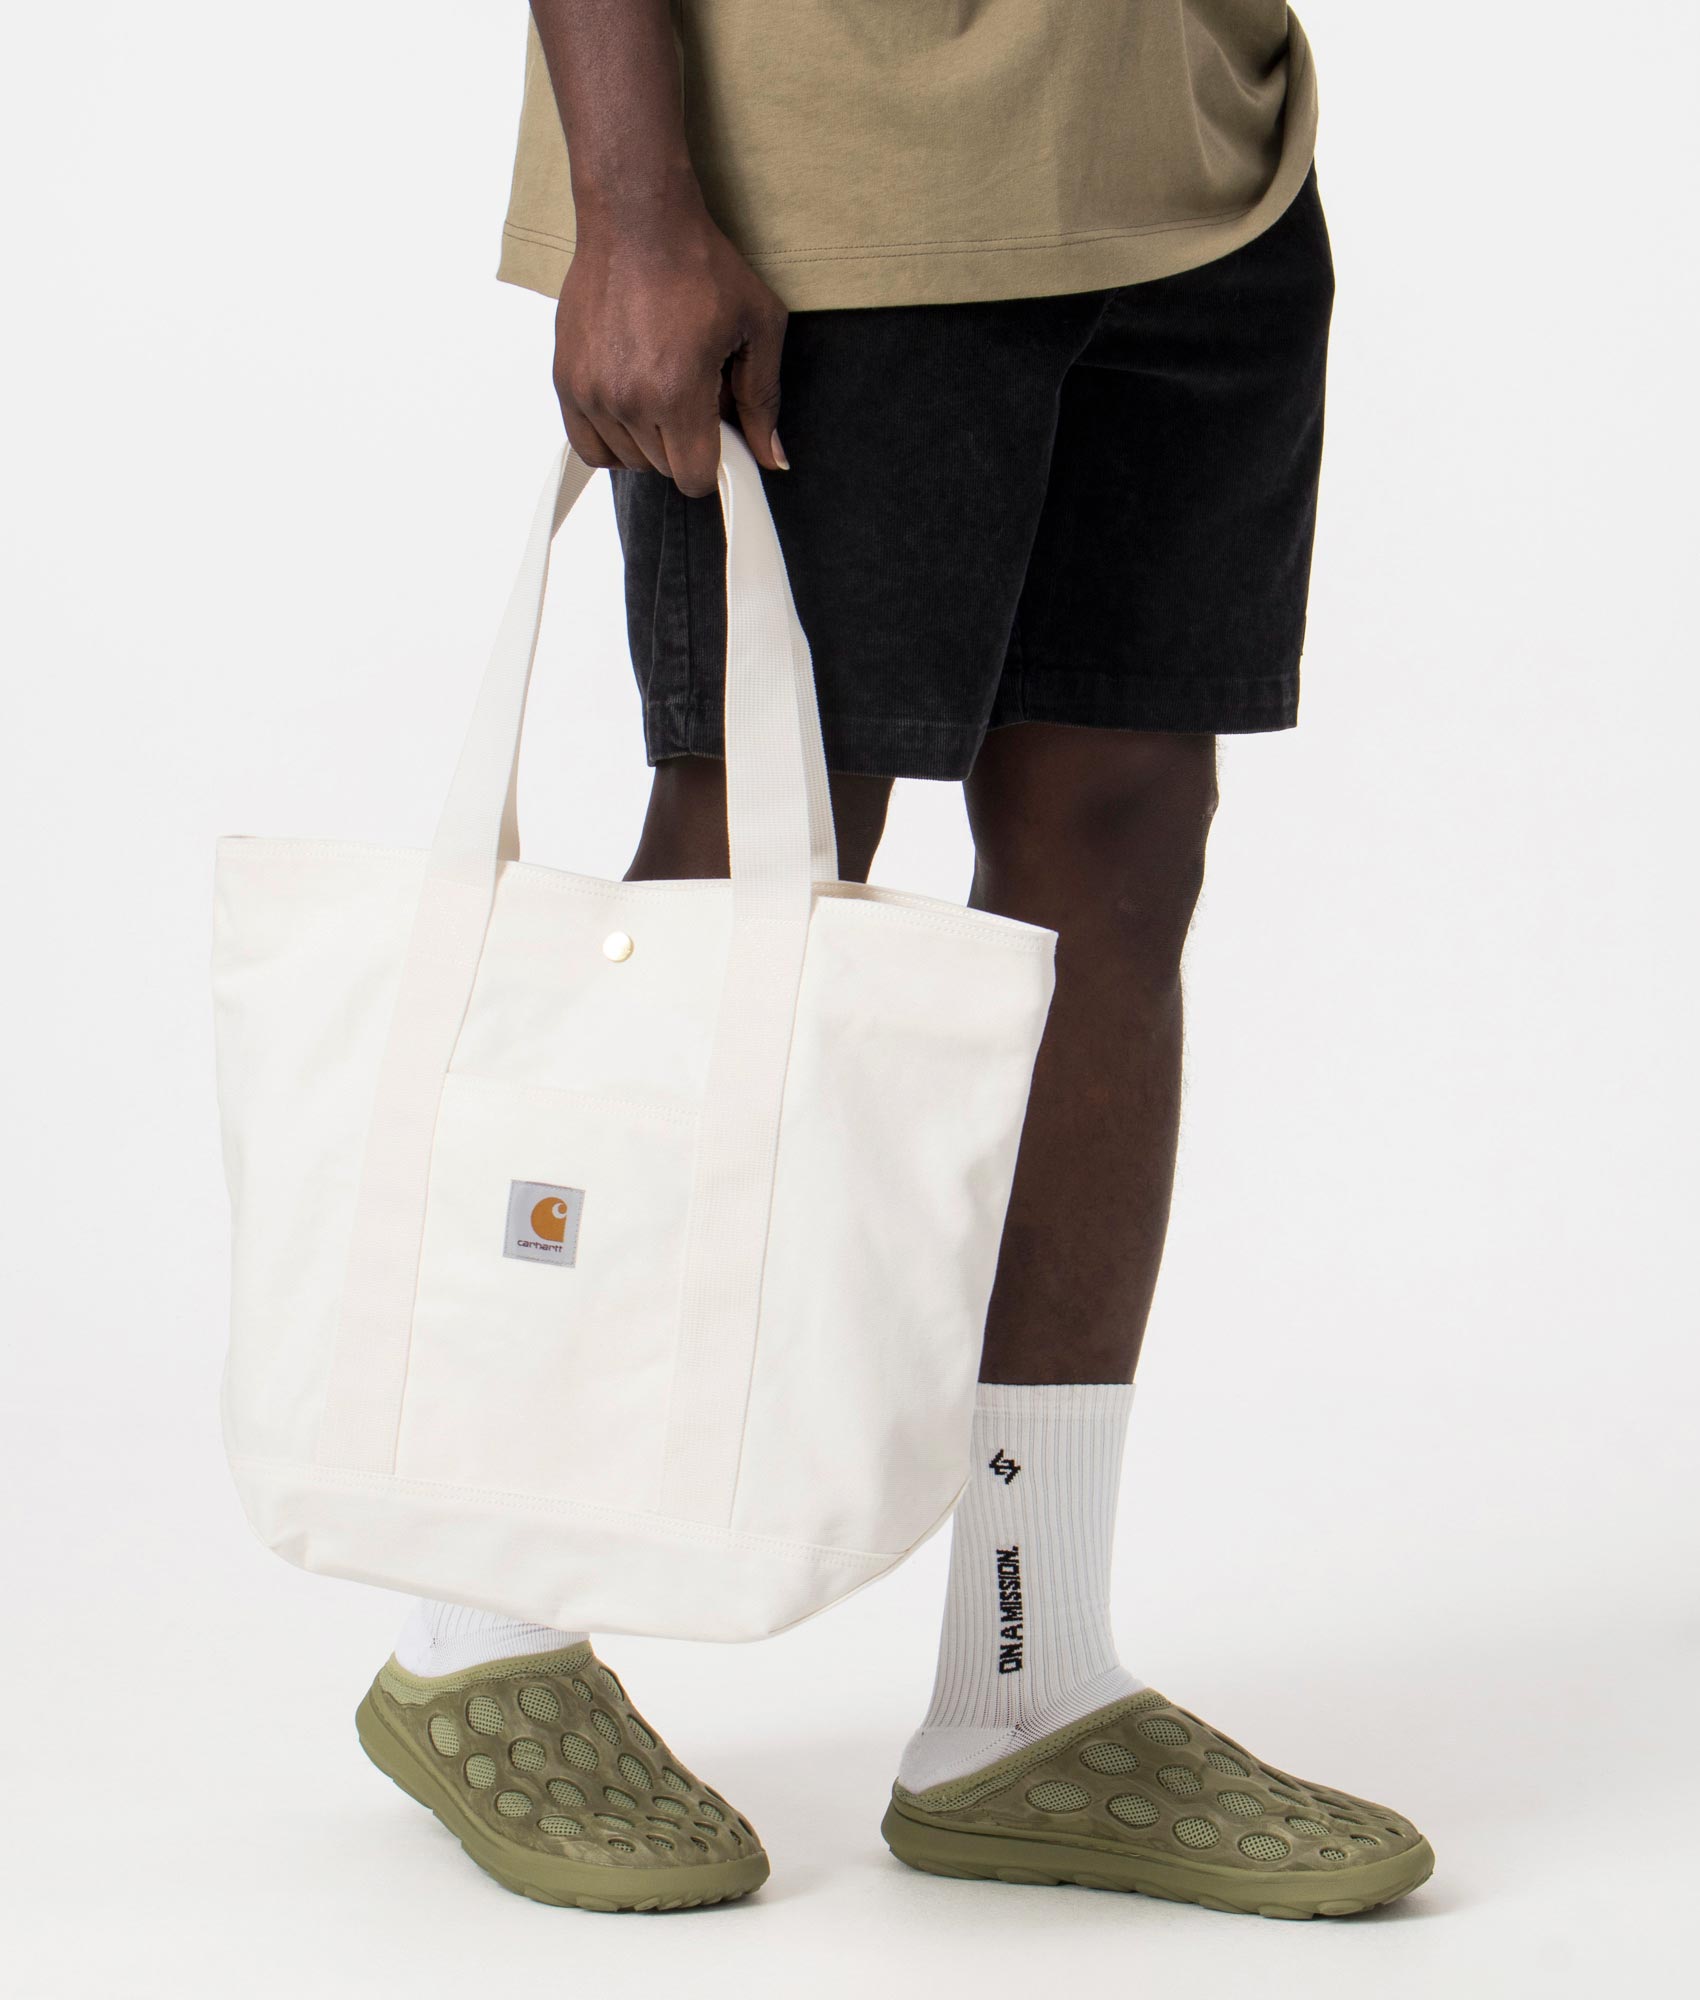 Carhartt WIP Mens Canvas Tote - Colour: D602 Wax - Size: One Size